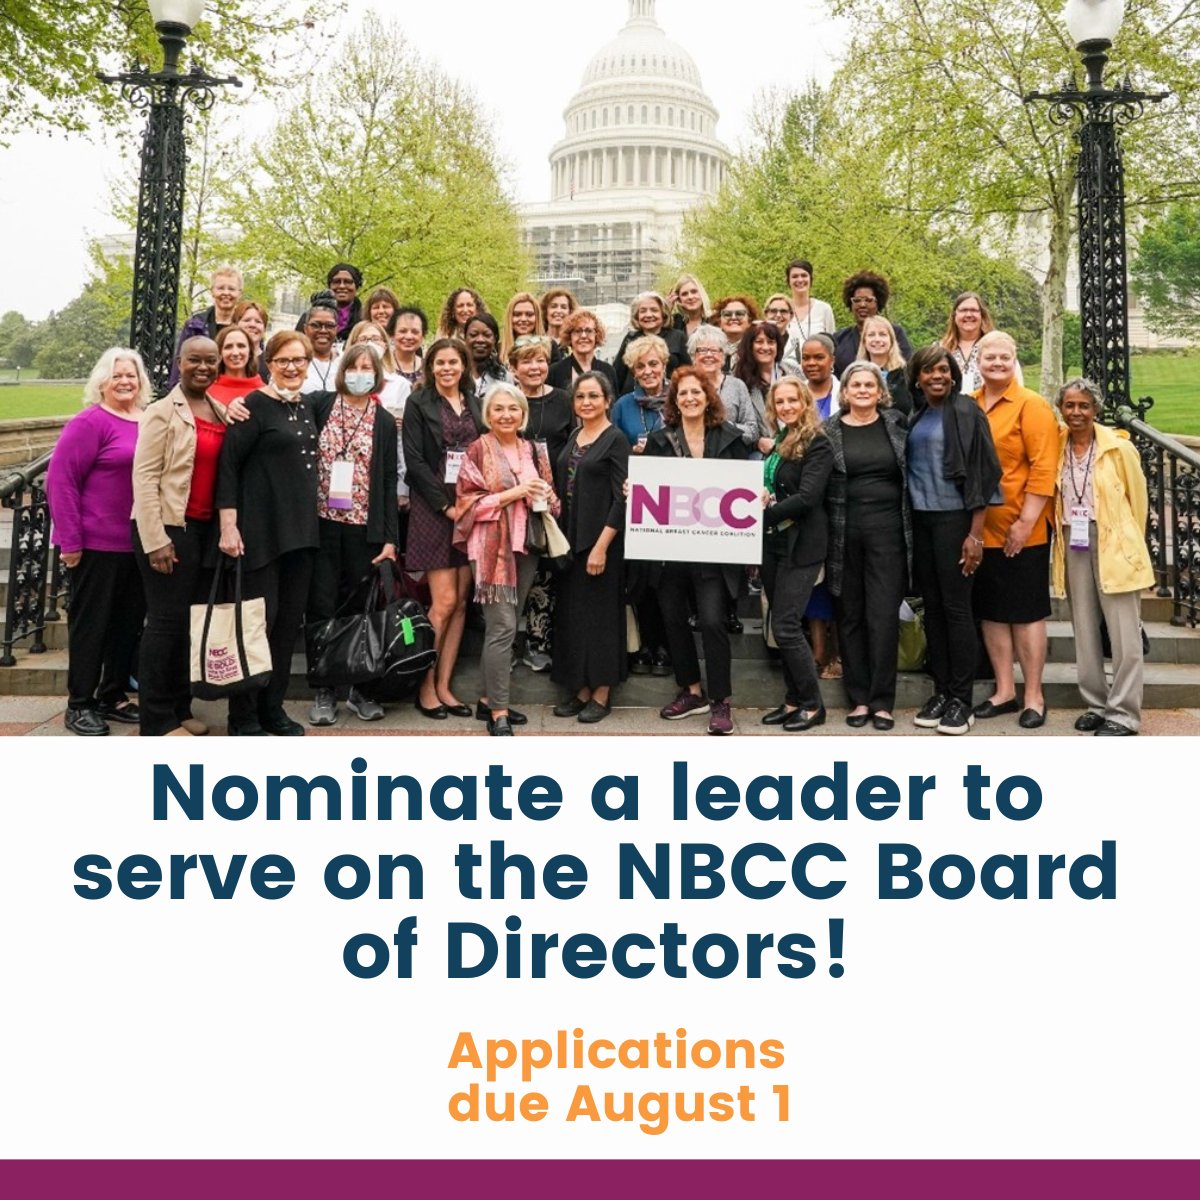 test Twitter Media - Help us make a significant impact on our nation's science and health care systems to #StopBreastCancer. NBCC invites you to nominate a leader in your organization to serve on our Board of Directors by August 1! https://t.co/wcEGtf9ava https://t.co/Sz7fcDeu17